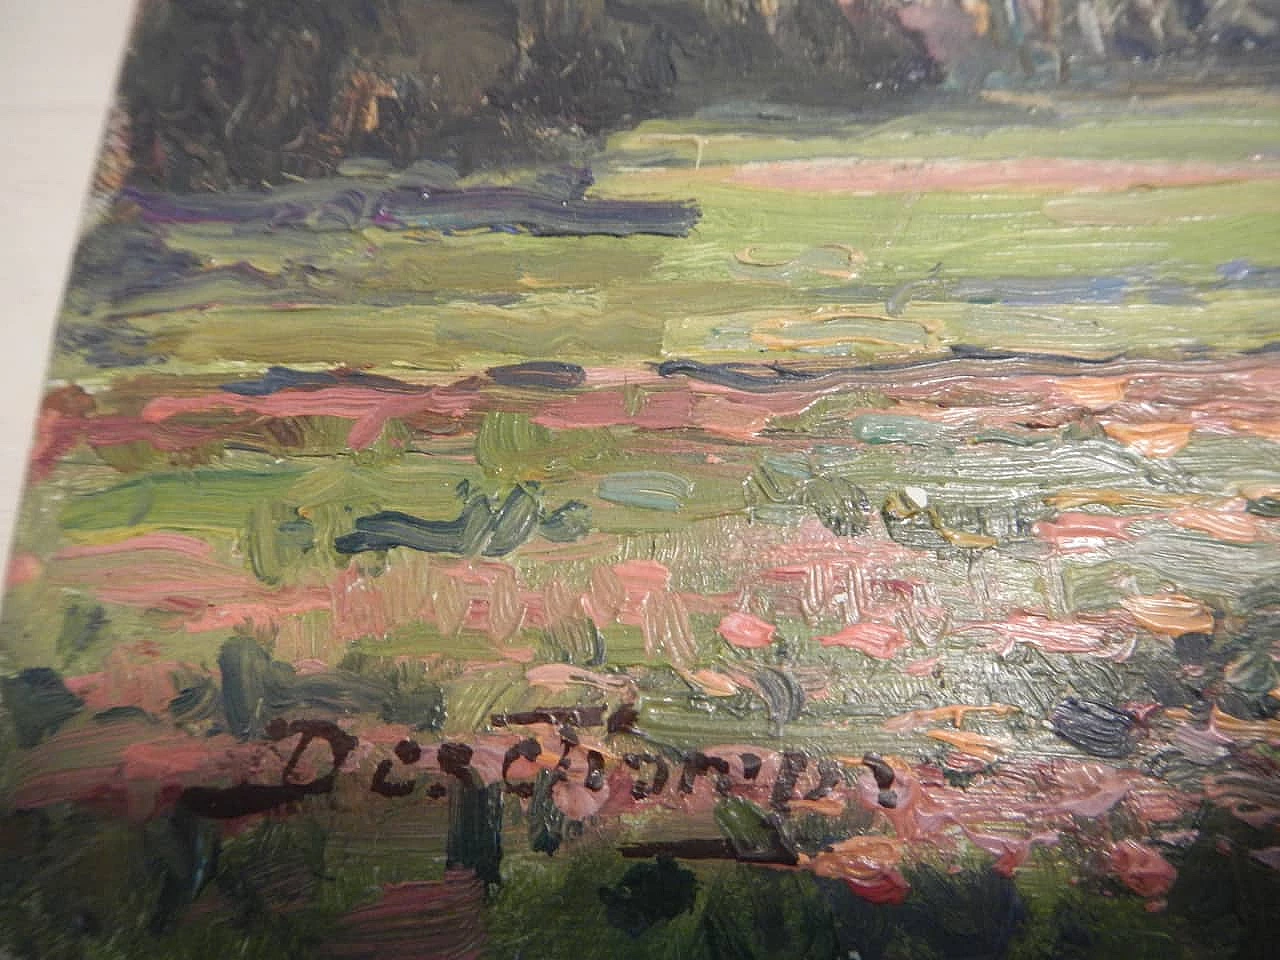 Des Champs, sunset on field, painting on wood, early 20th century 11